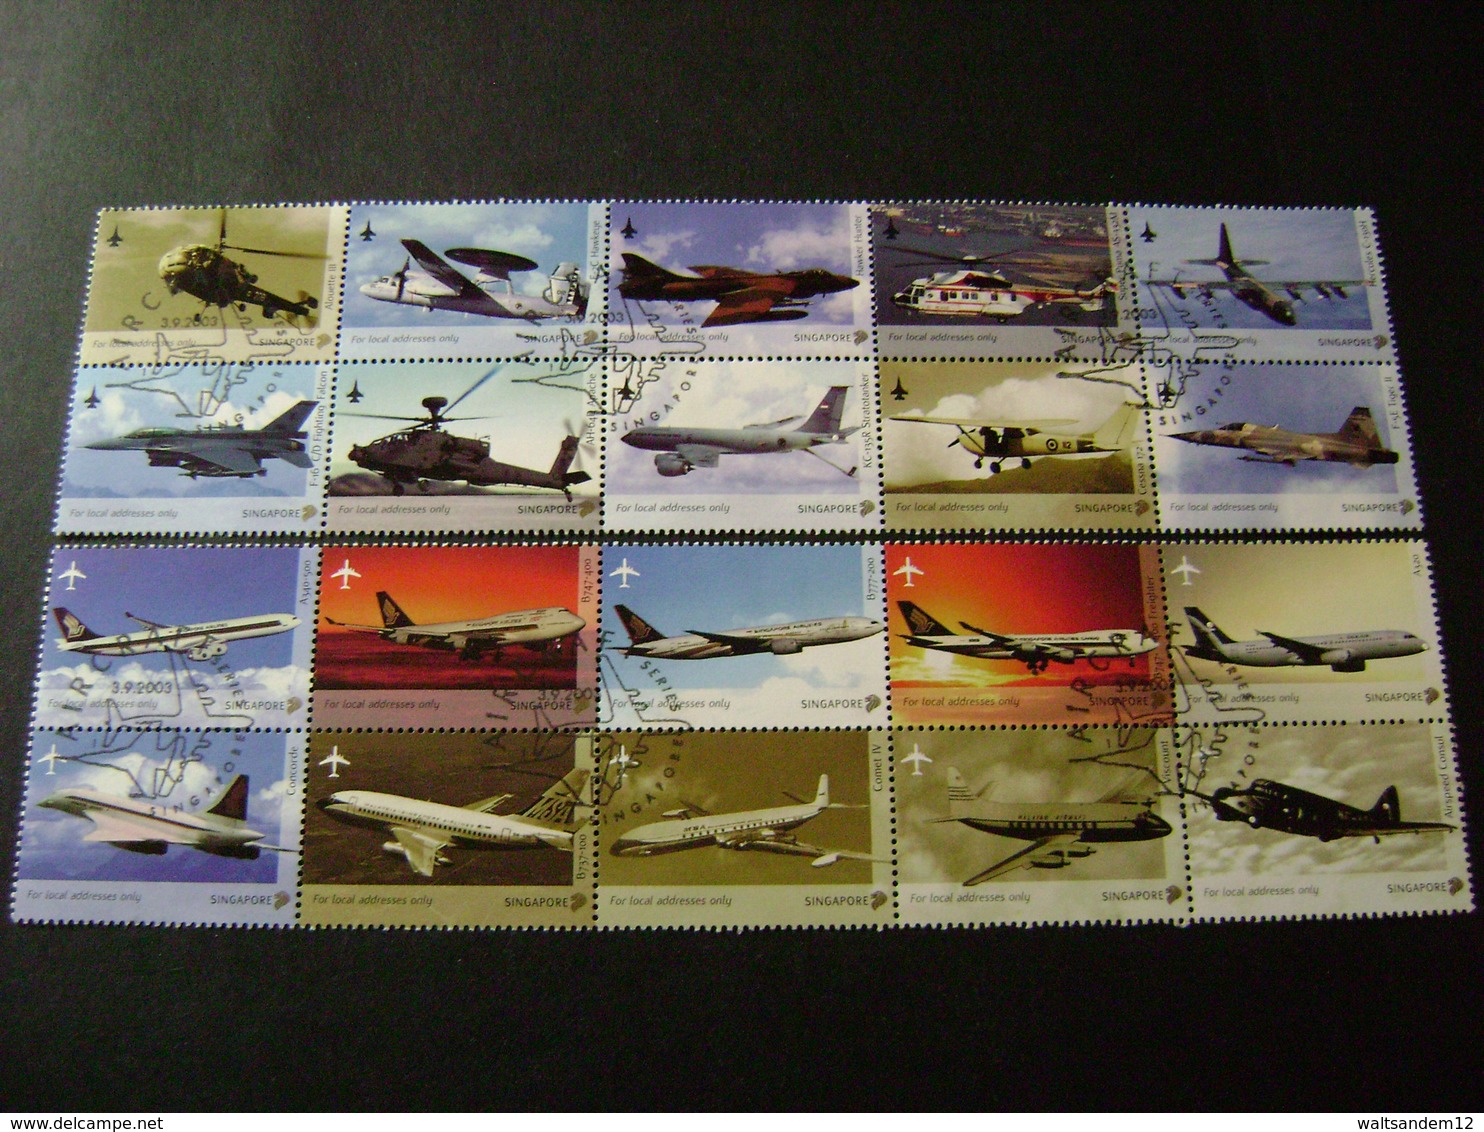 Singapore 2003 Commemorative/special Issues (SG 1262-1271,1273-78,1300-02,1304-07,1309-1328,1351-54) 3 Images - Used - Singapore (1959-...)